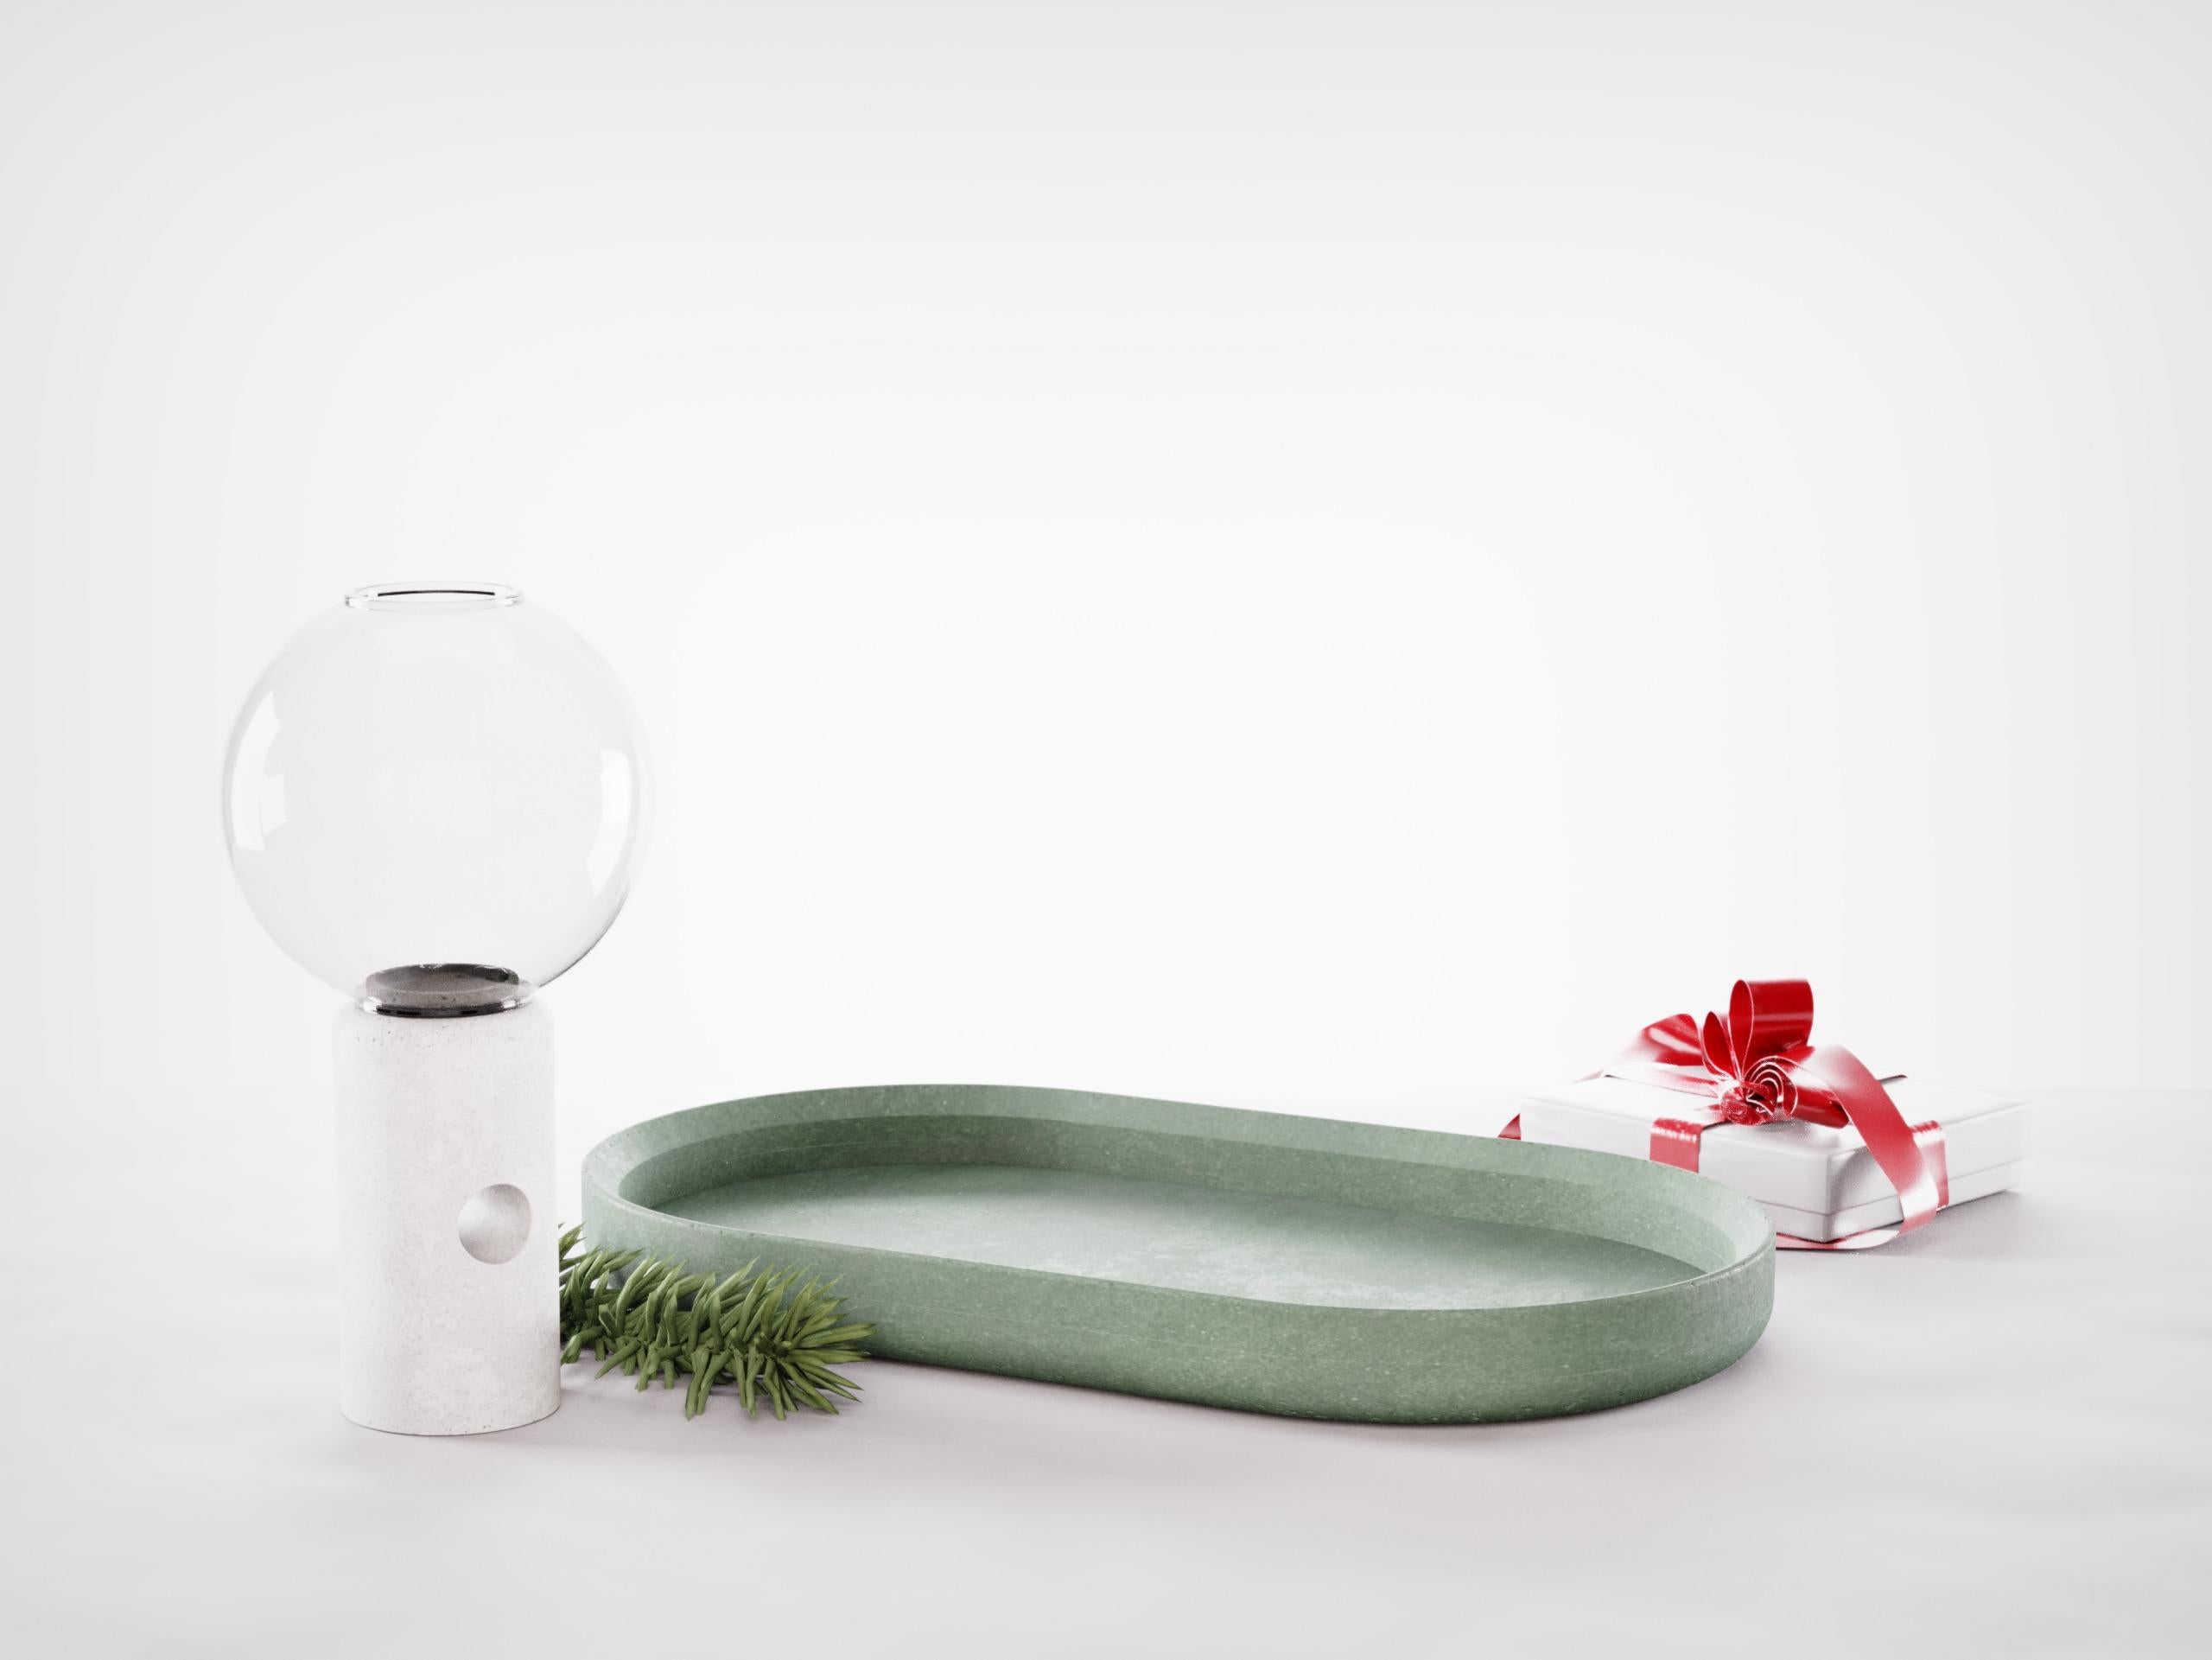 Now available in Christmas Edition! 
The Efesto candleholder is a design product of craftmanship from the concrete accessories collection by Forma & Cemento. This candleholder is made of concrete and blown glass to create a unique game of materials